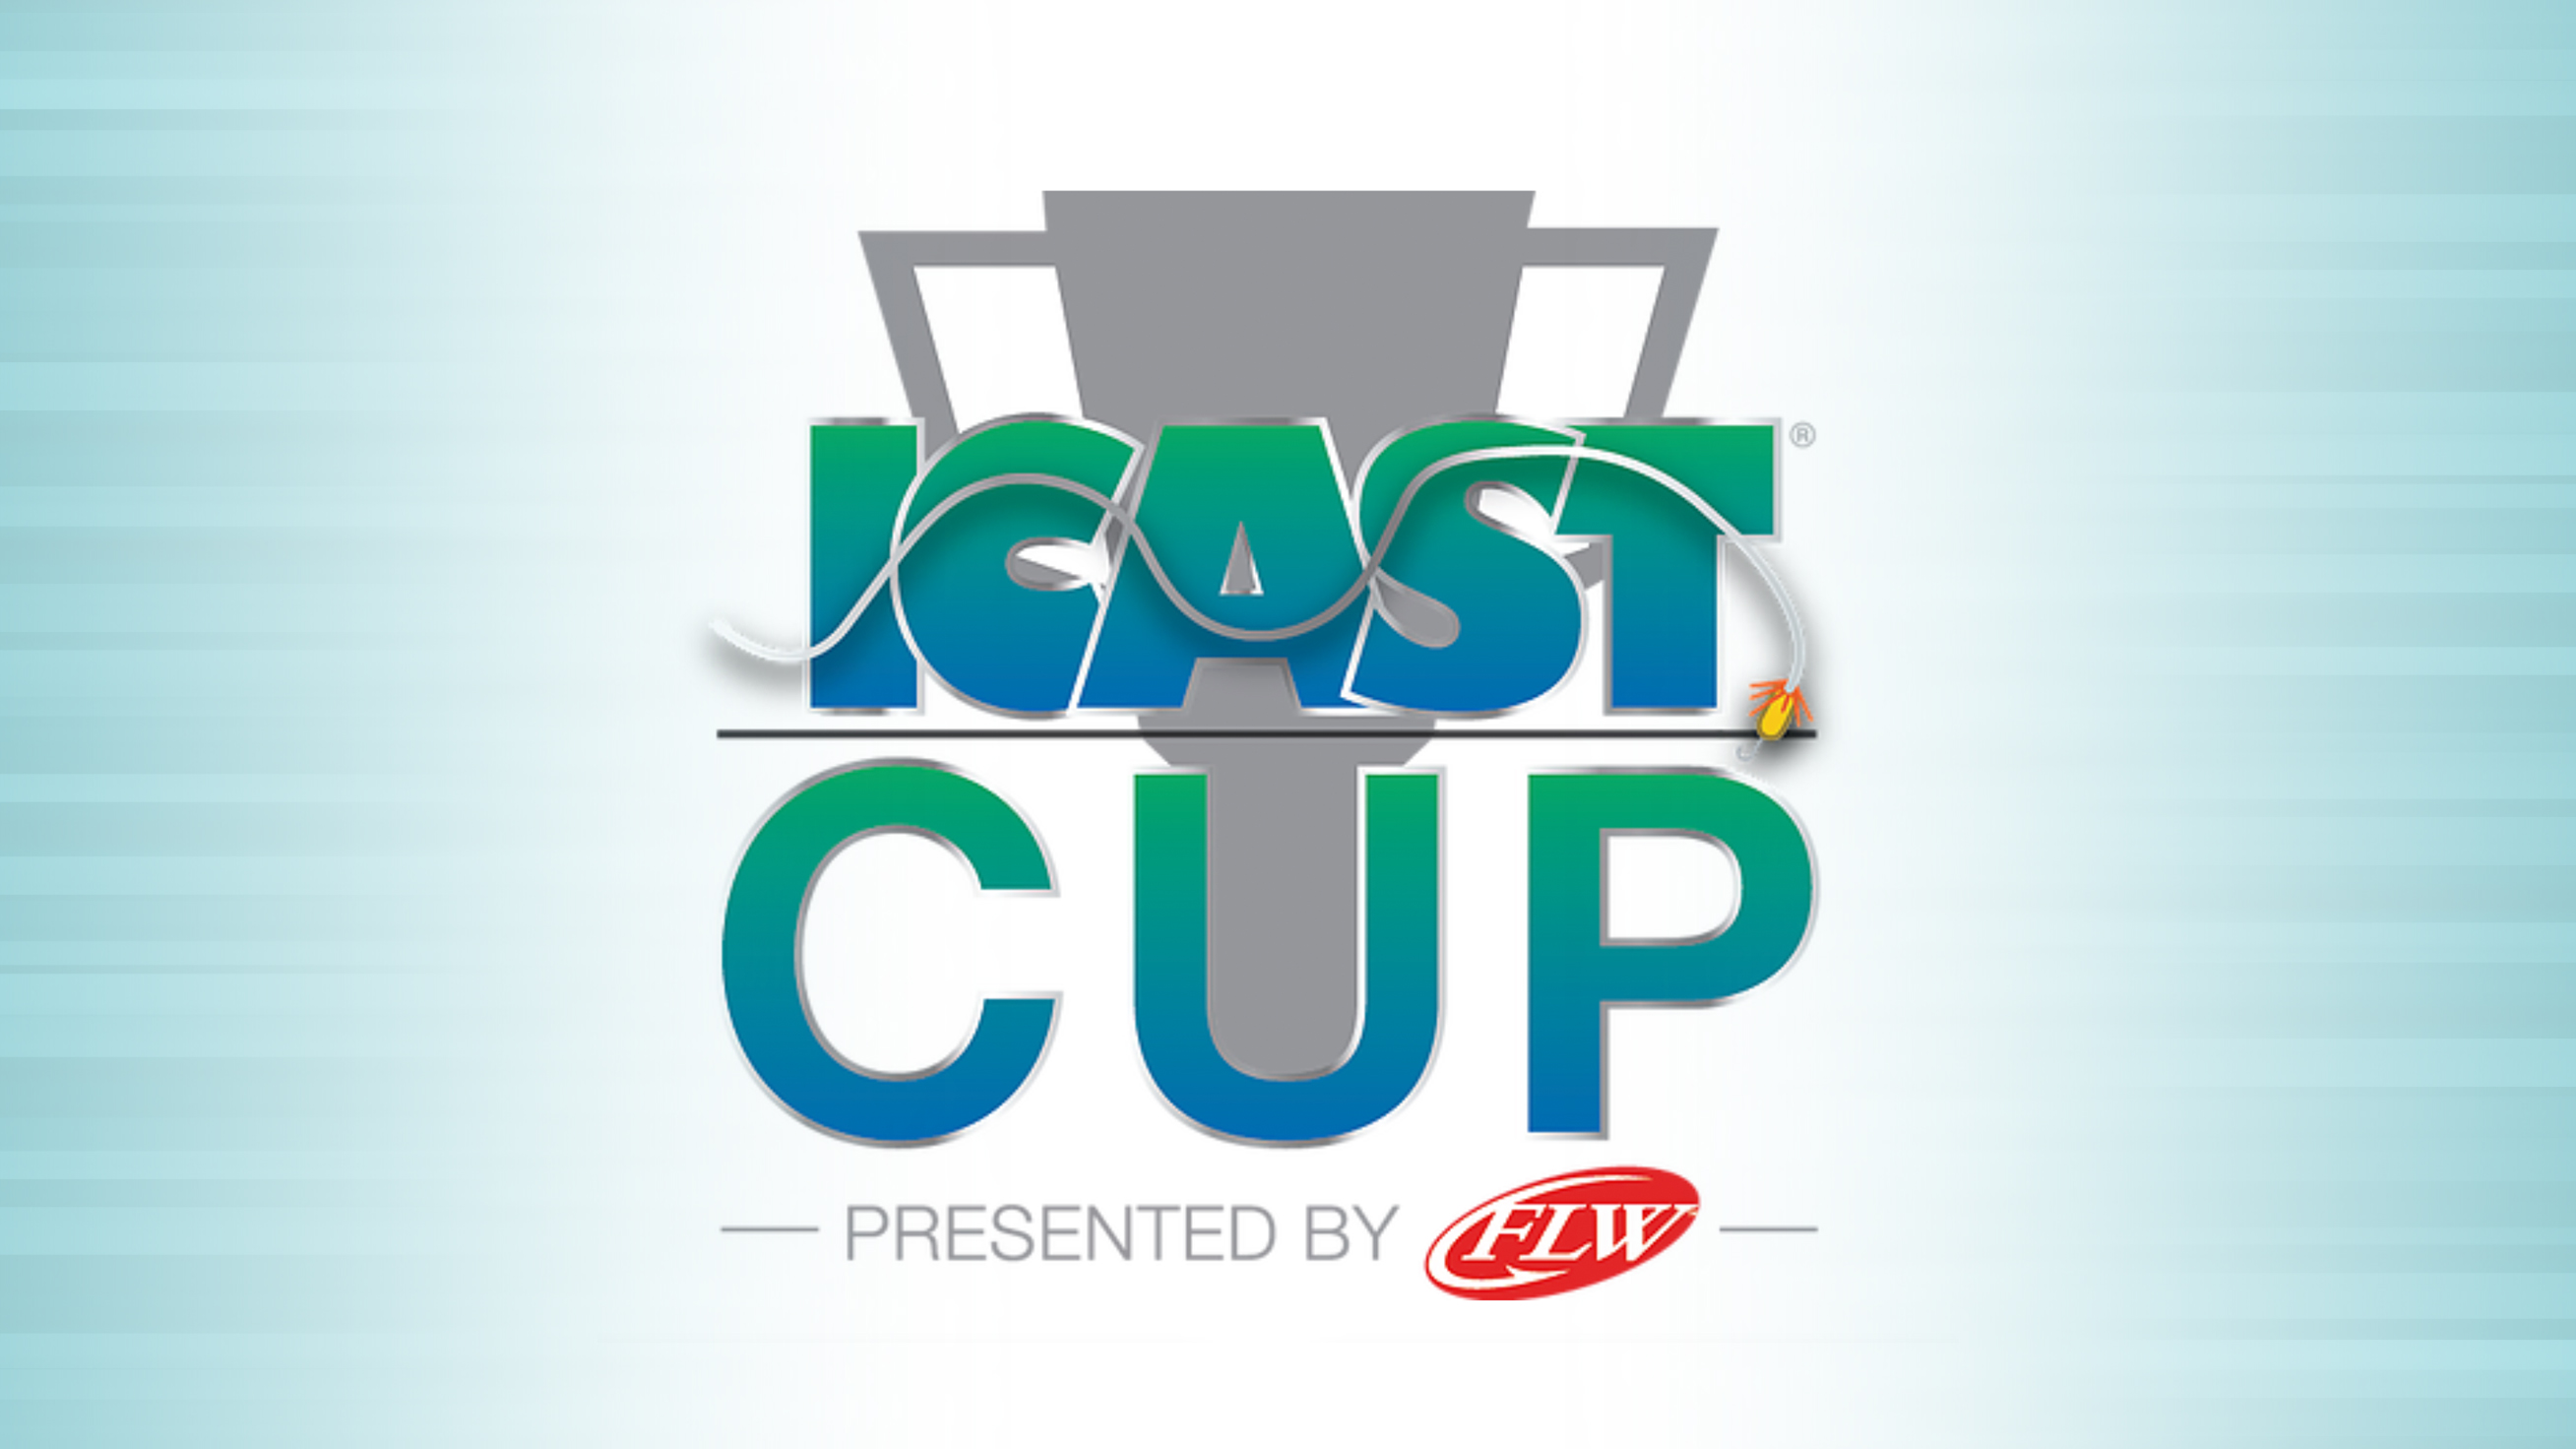 ICAST Cup Winners Announced - Major League Fishing